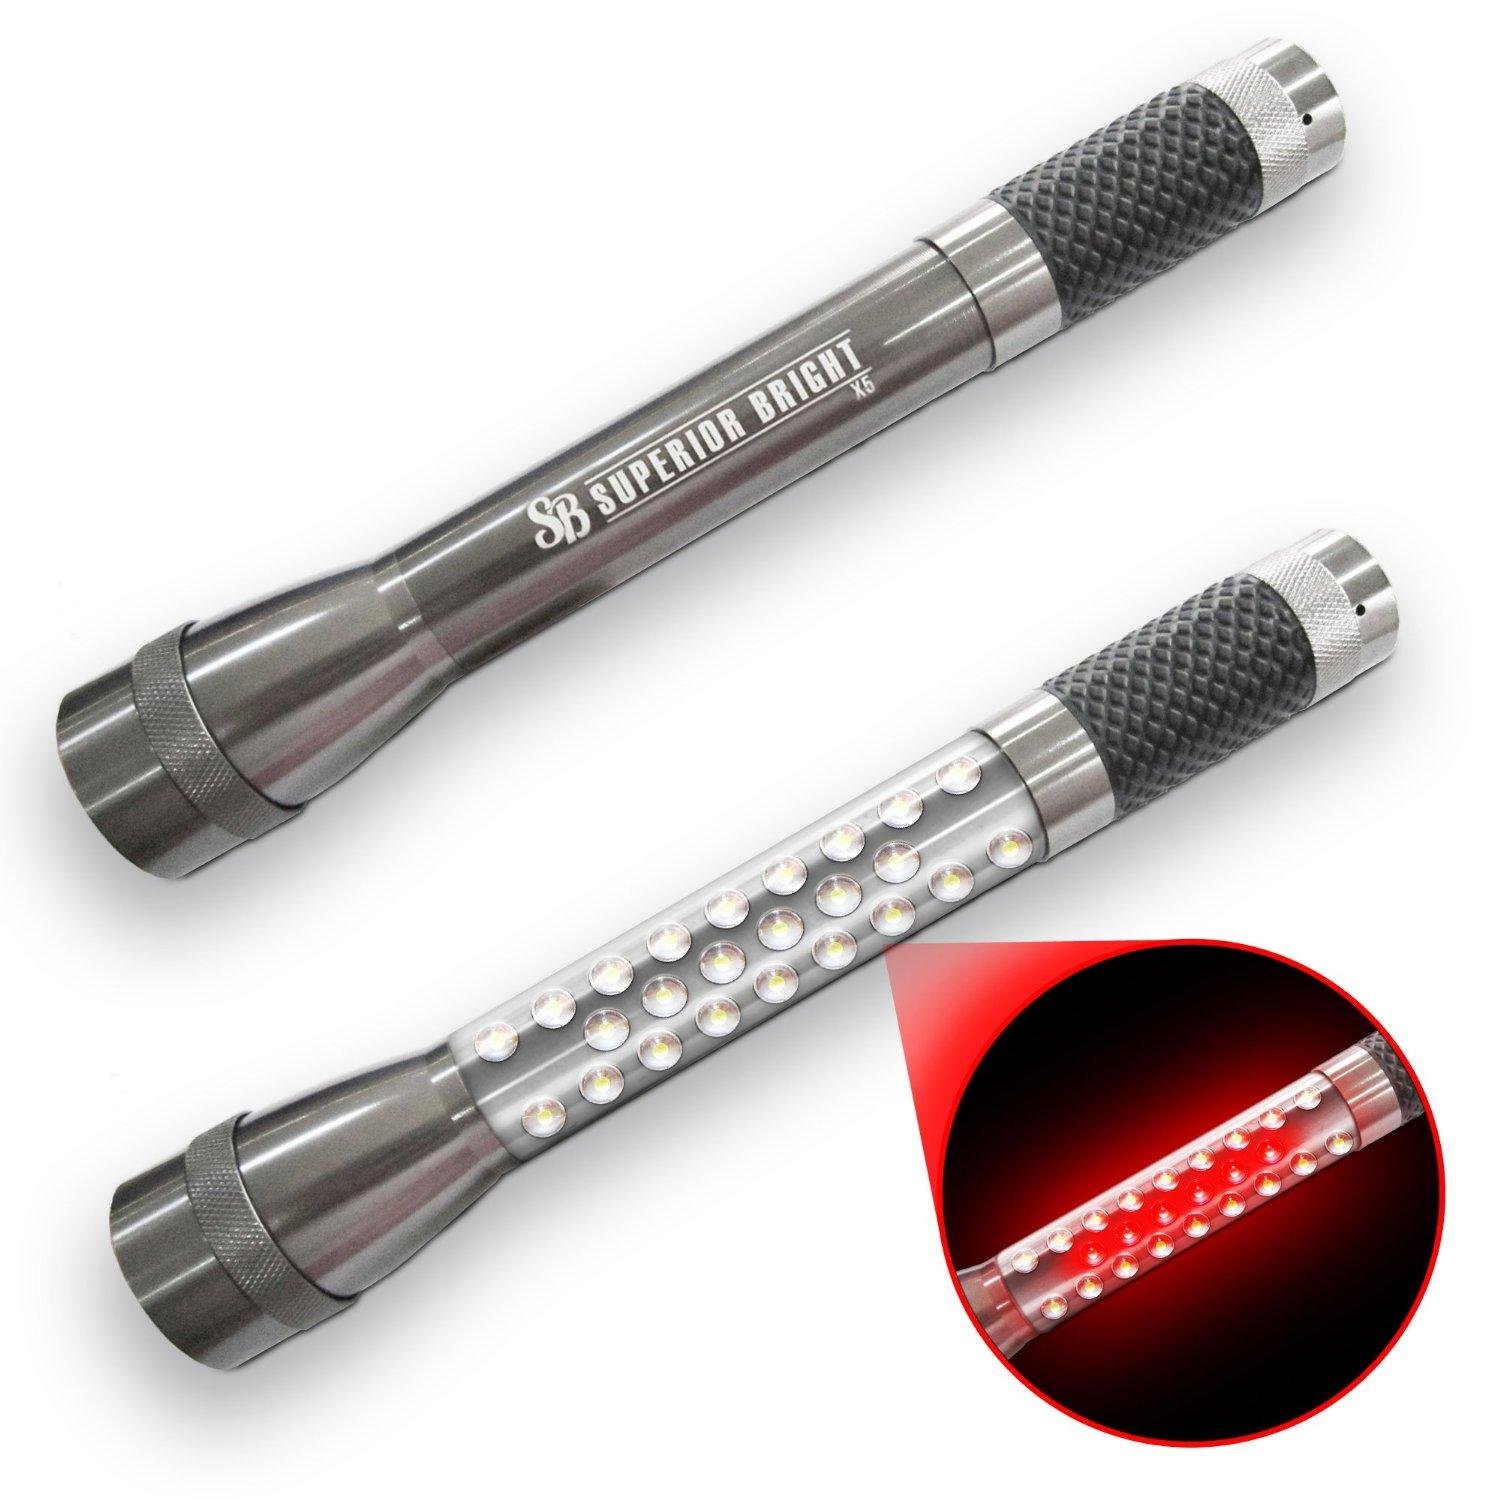 Flashlight LED- Best All Purpose Bright Everyday & All Weather Use. Car Emergency Red Flashing Light! Keep You & Your Family Safe! Flexible Uses- Boat, Camping.